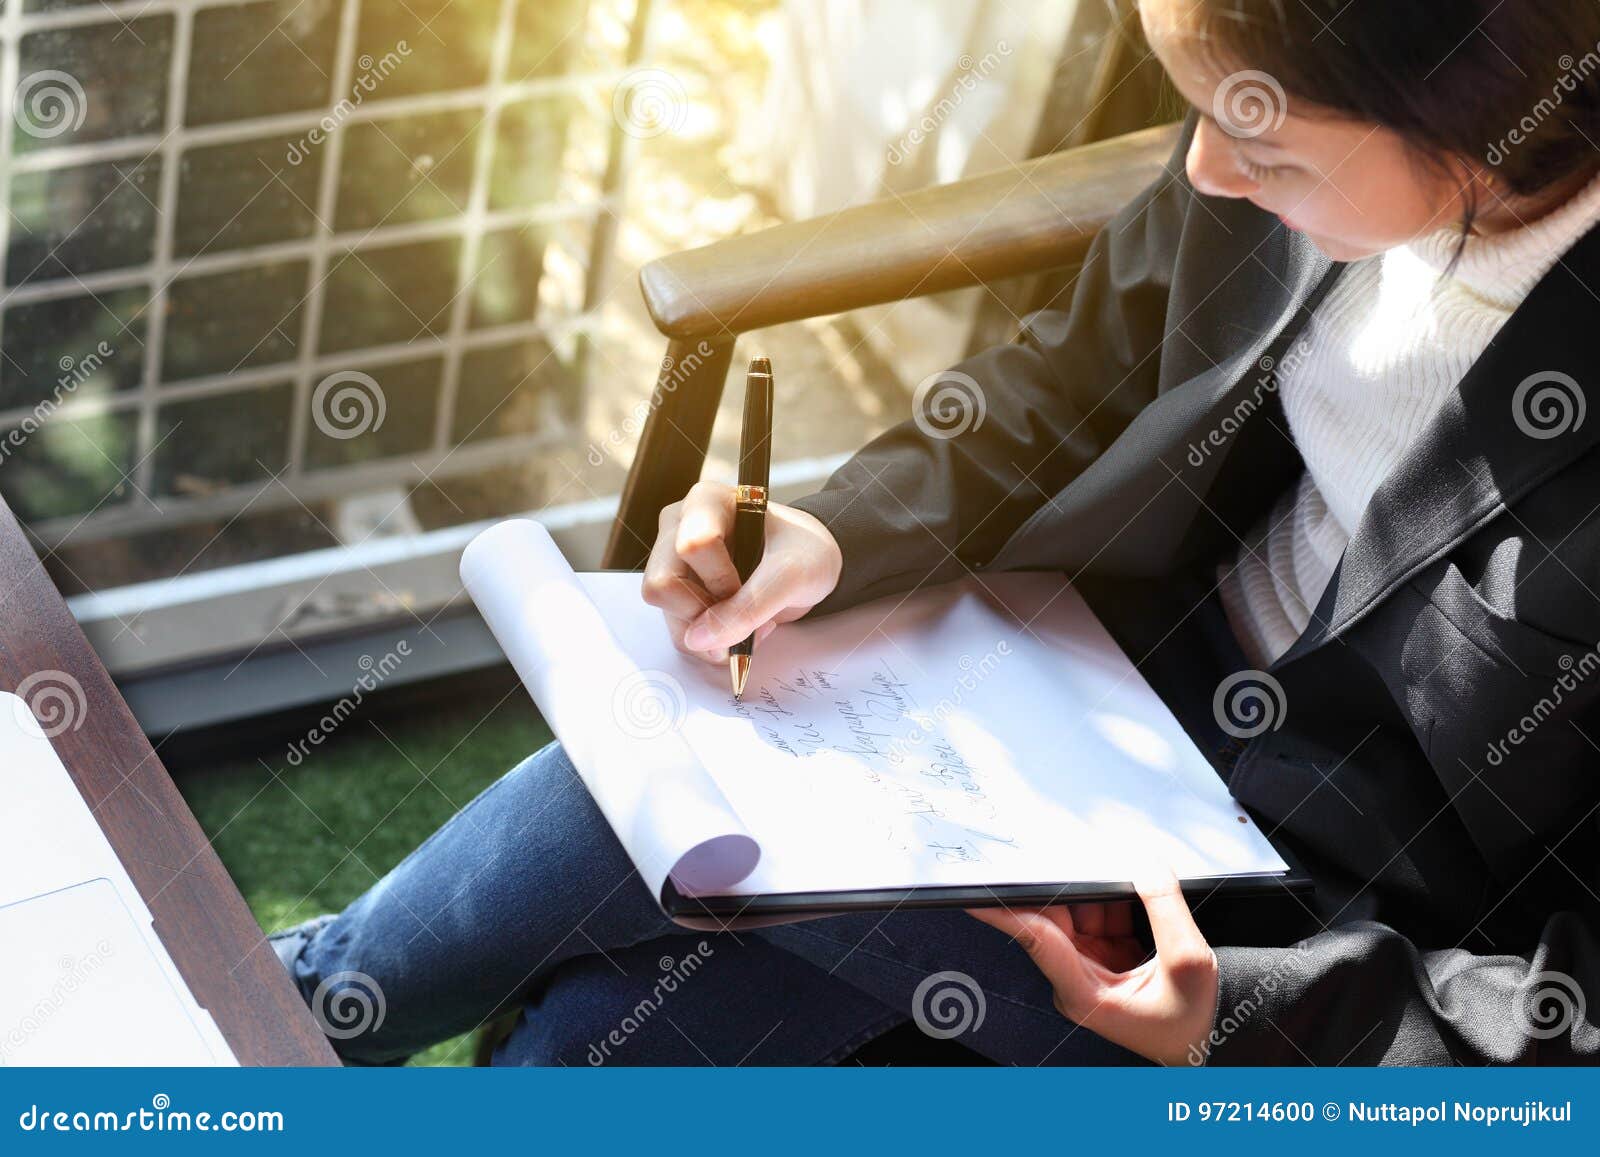 business woman writing on clipboard outside on terrace,on top view.